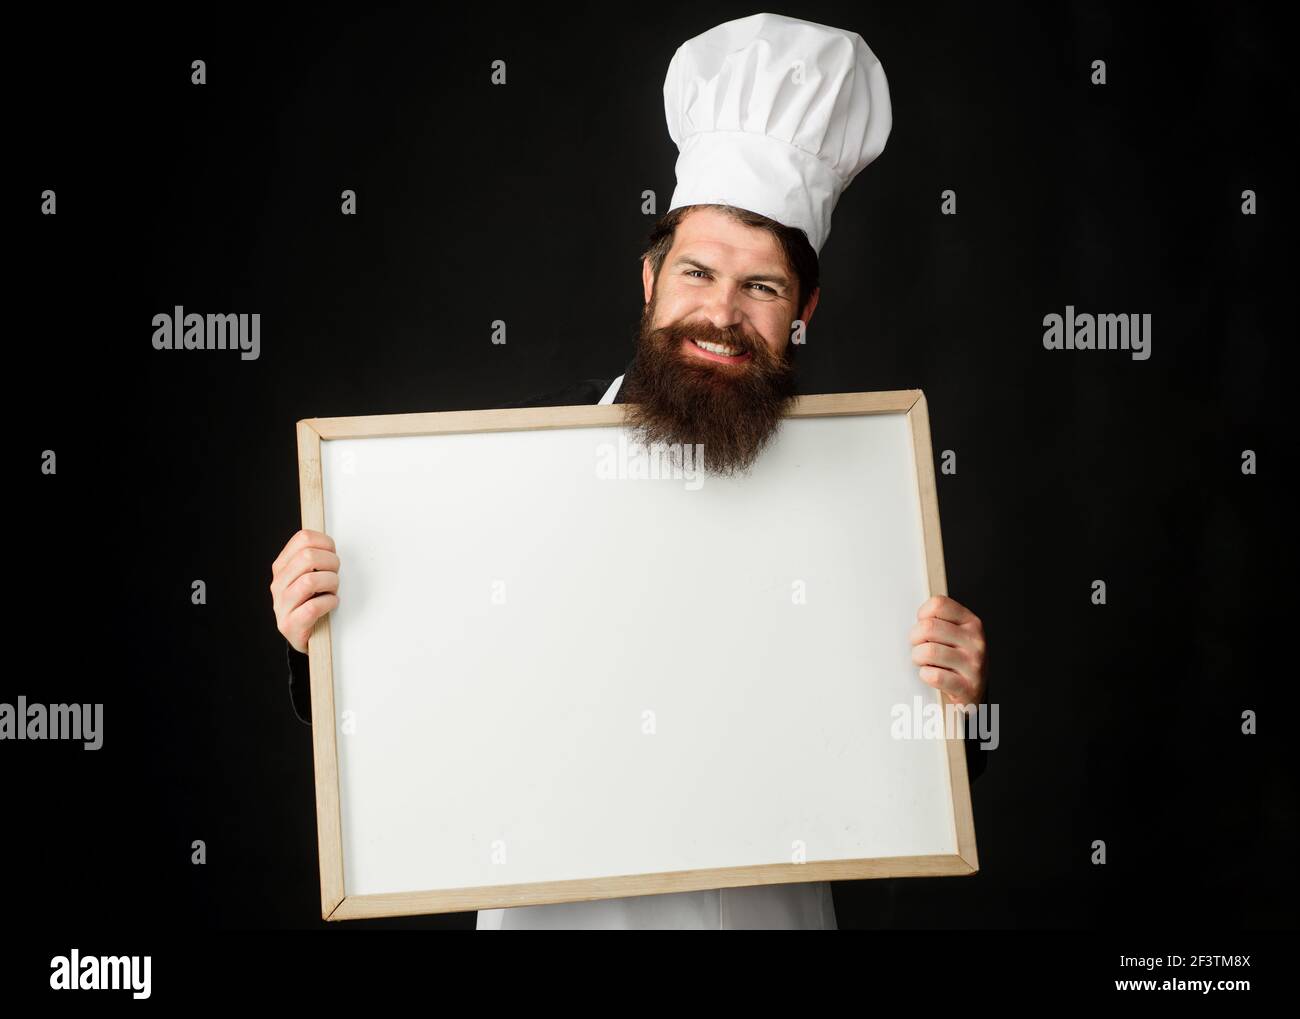 Master chef, baker or cook with menu blackboard. Cooking, culinary, advertisement and food concept. Stock Photo